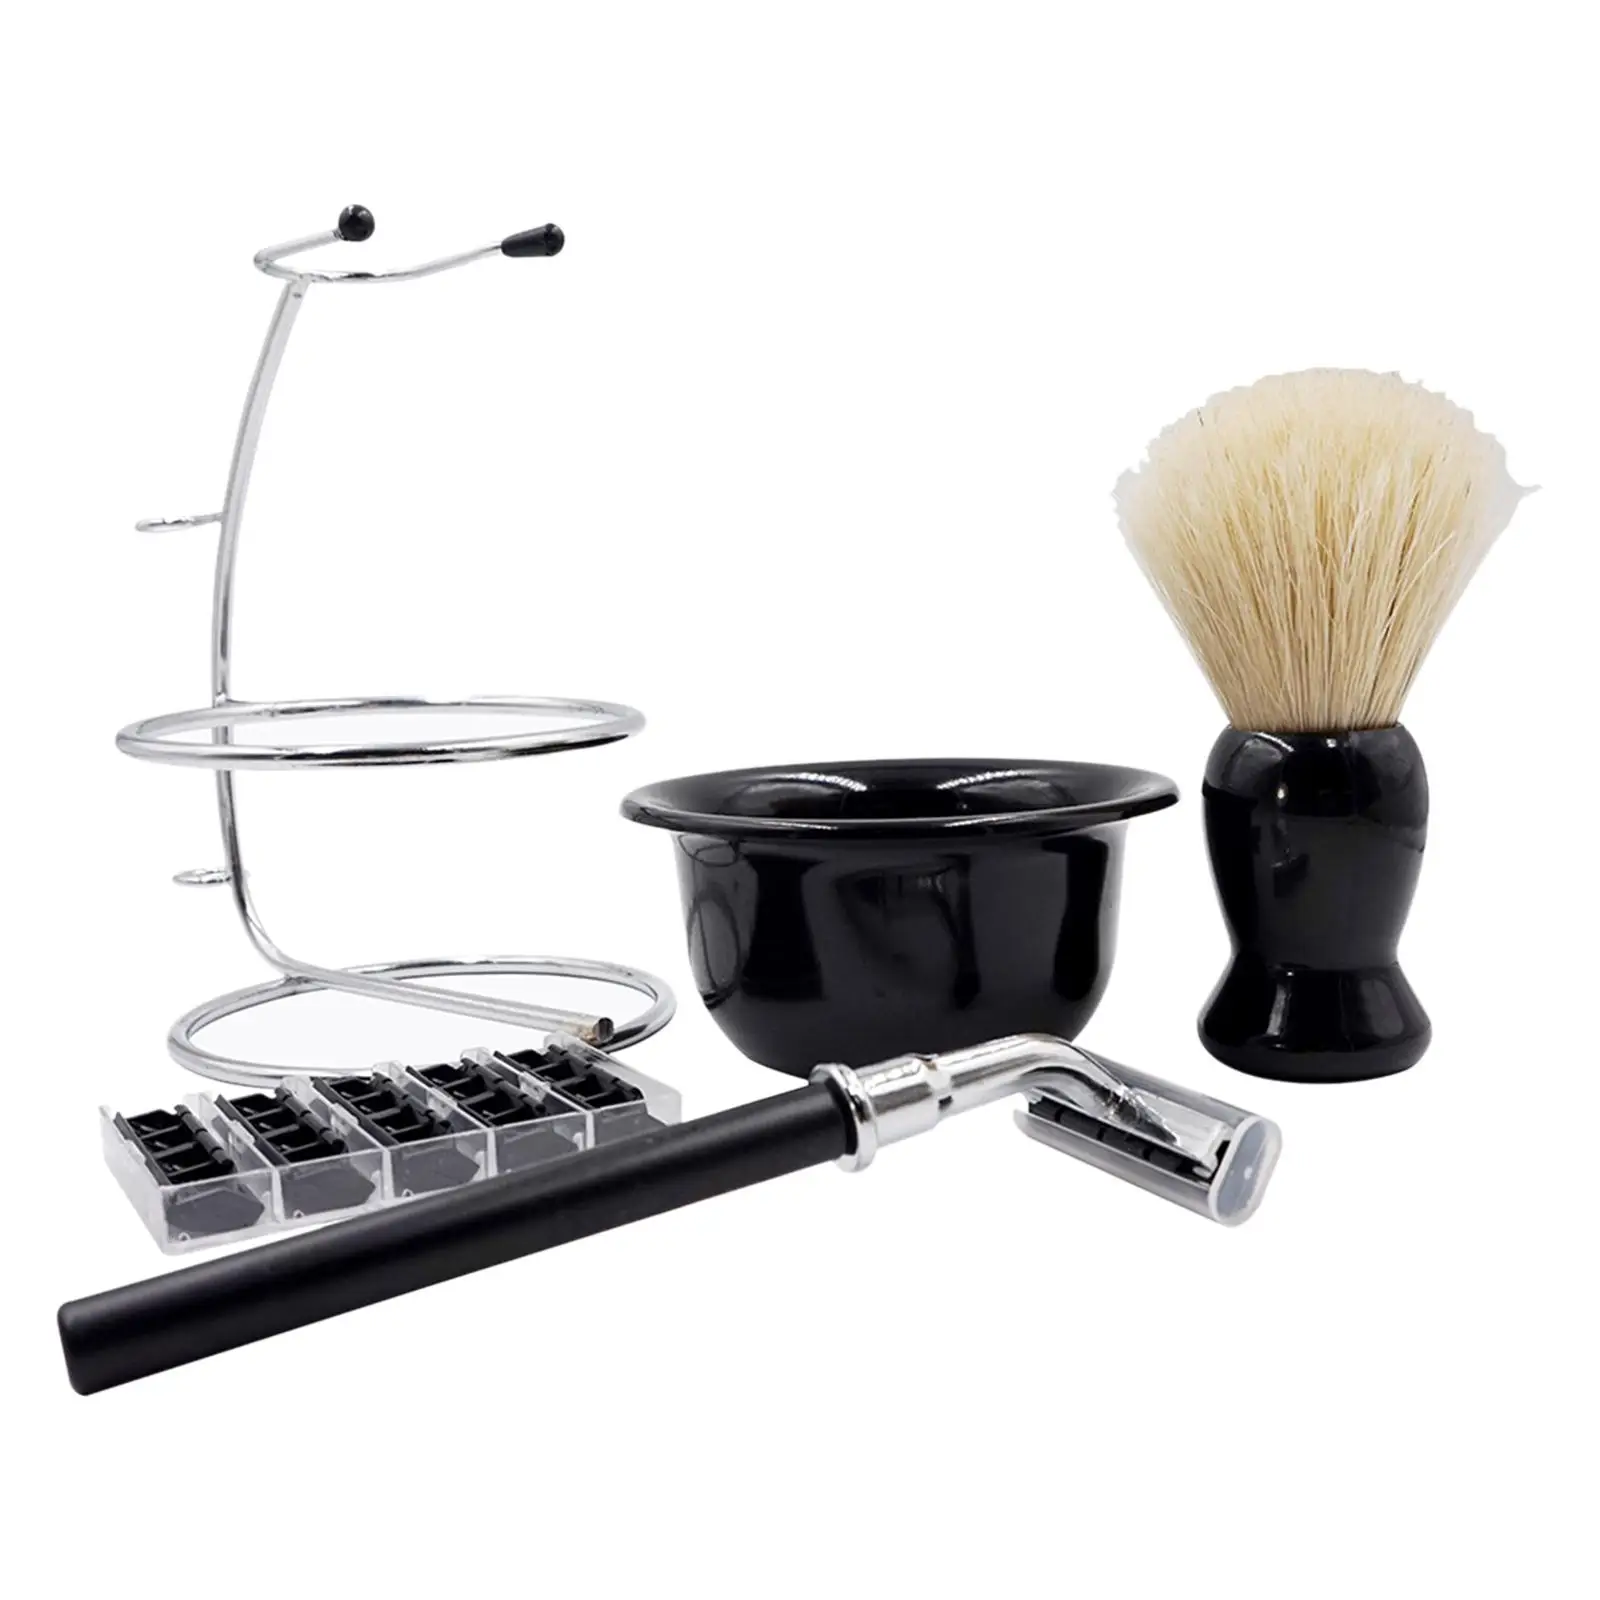 Travel Shaving Kit for Men Manual Stand Brush Bowl Set Accessories Durable Portable Solid Stainess Steel Holder Elegant